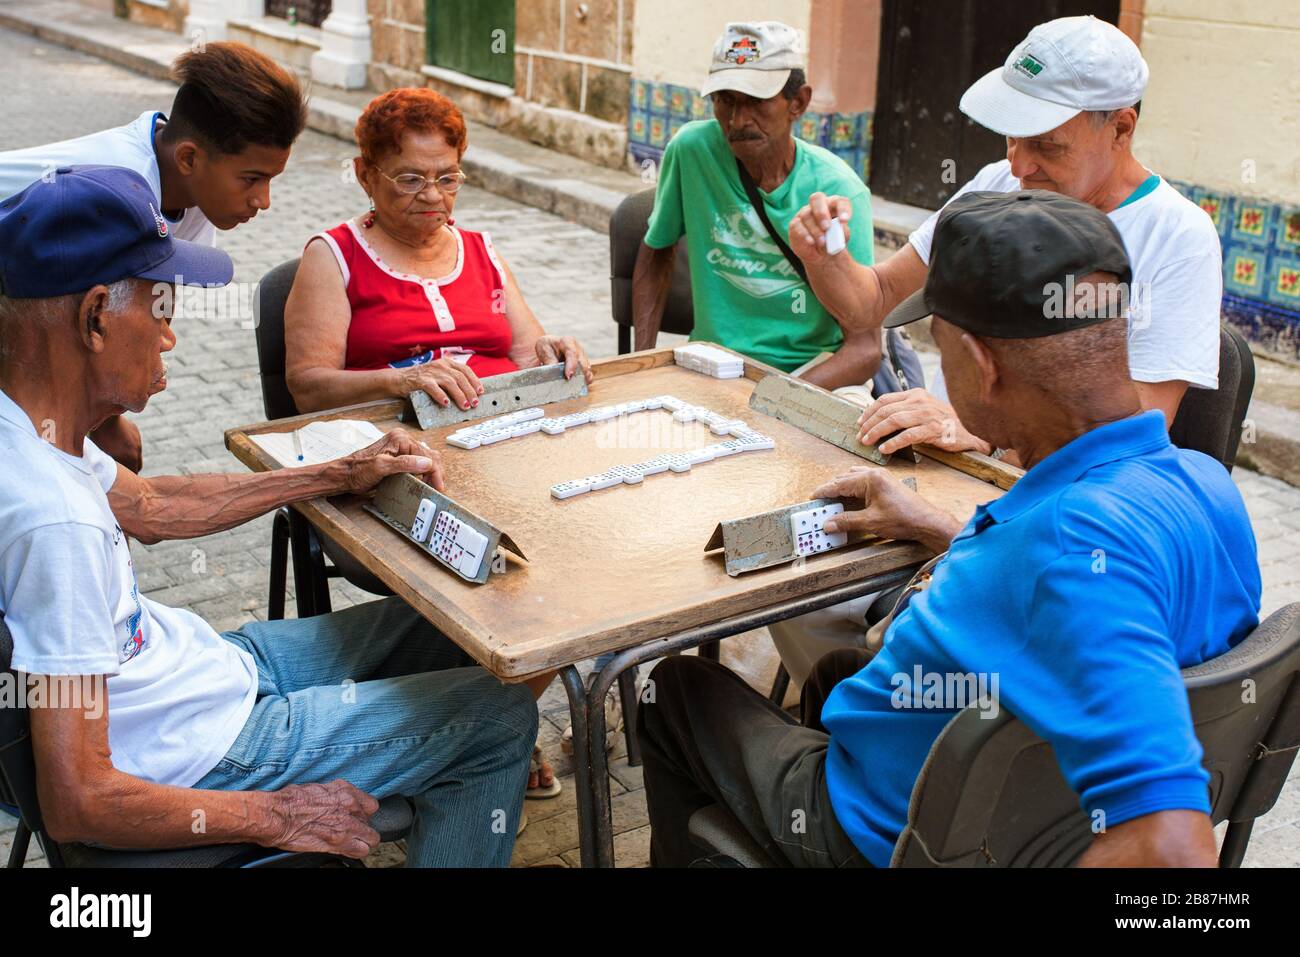 Elderly people playing domino game in the street of old Havana Cuba Stock Photo